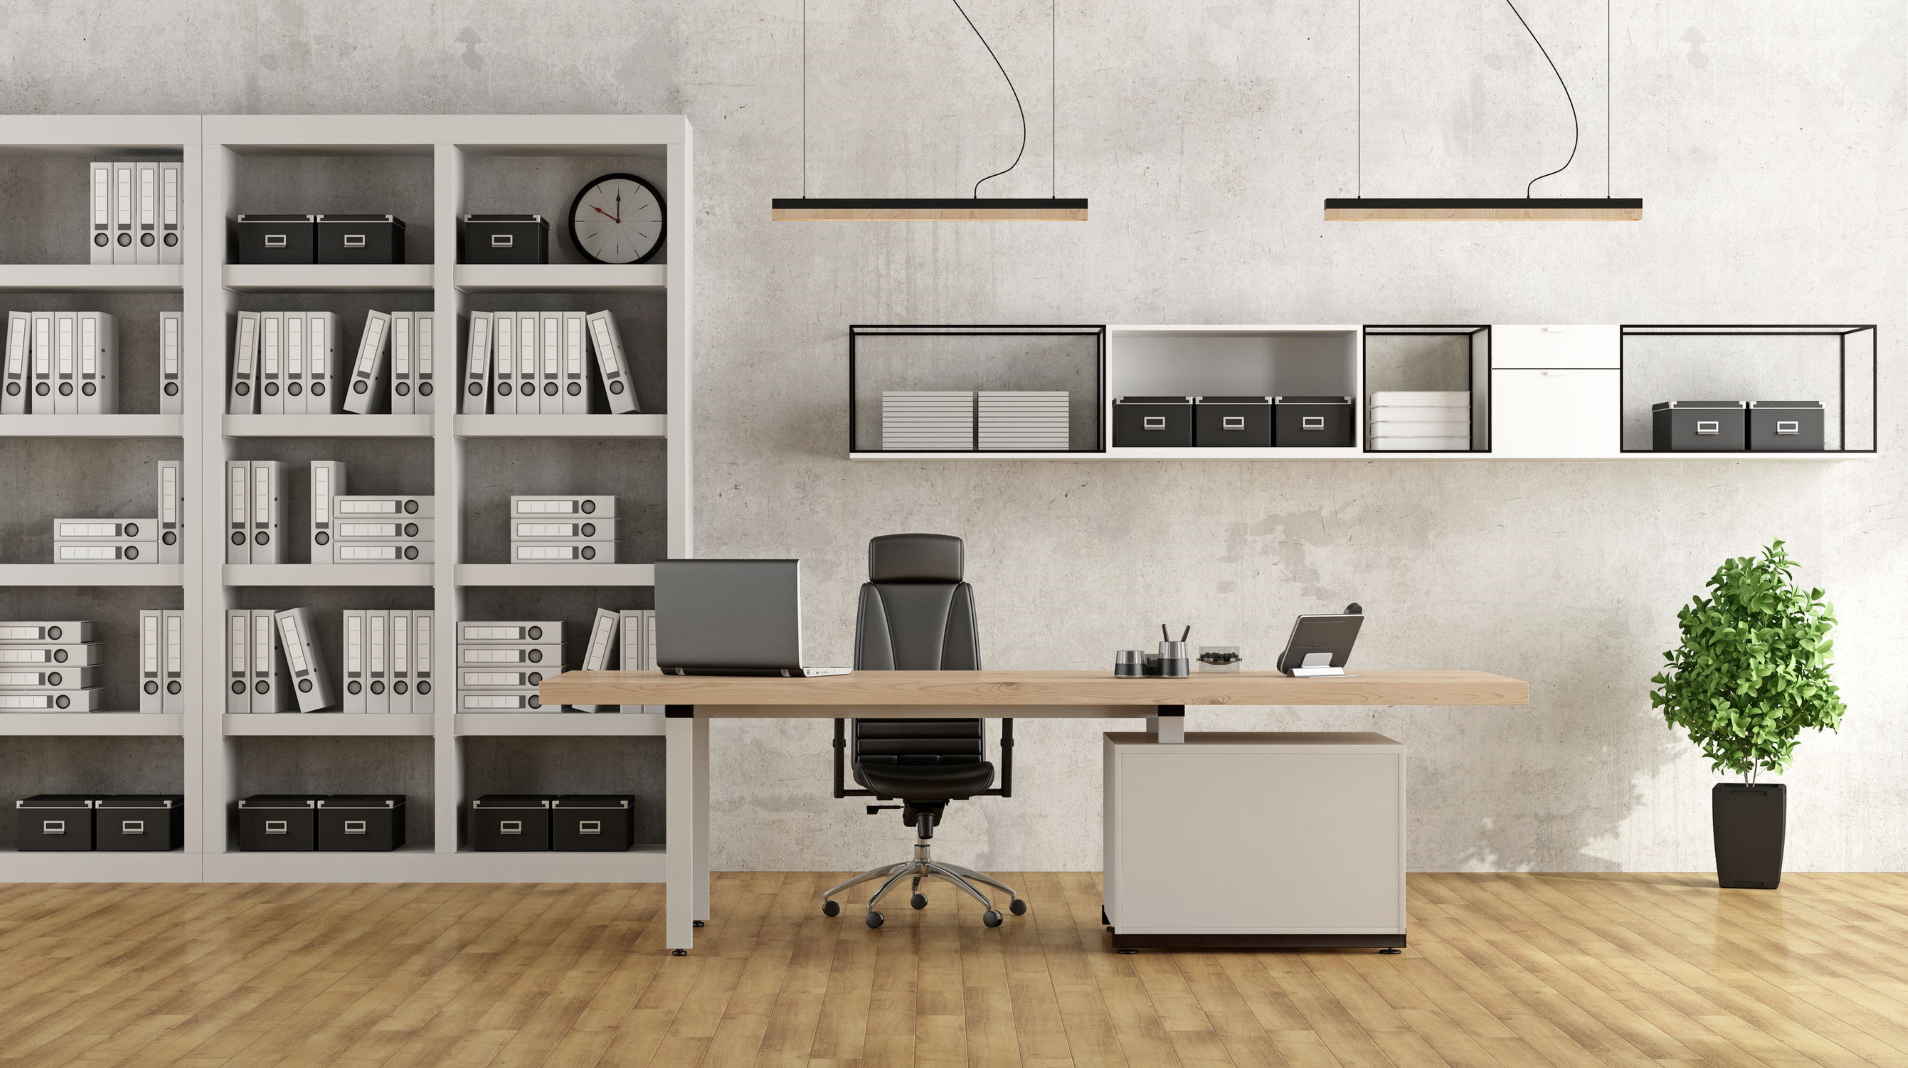 Bootstrap Business: 5 Office Decor Ideas To Boost Workplace Productivity